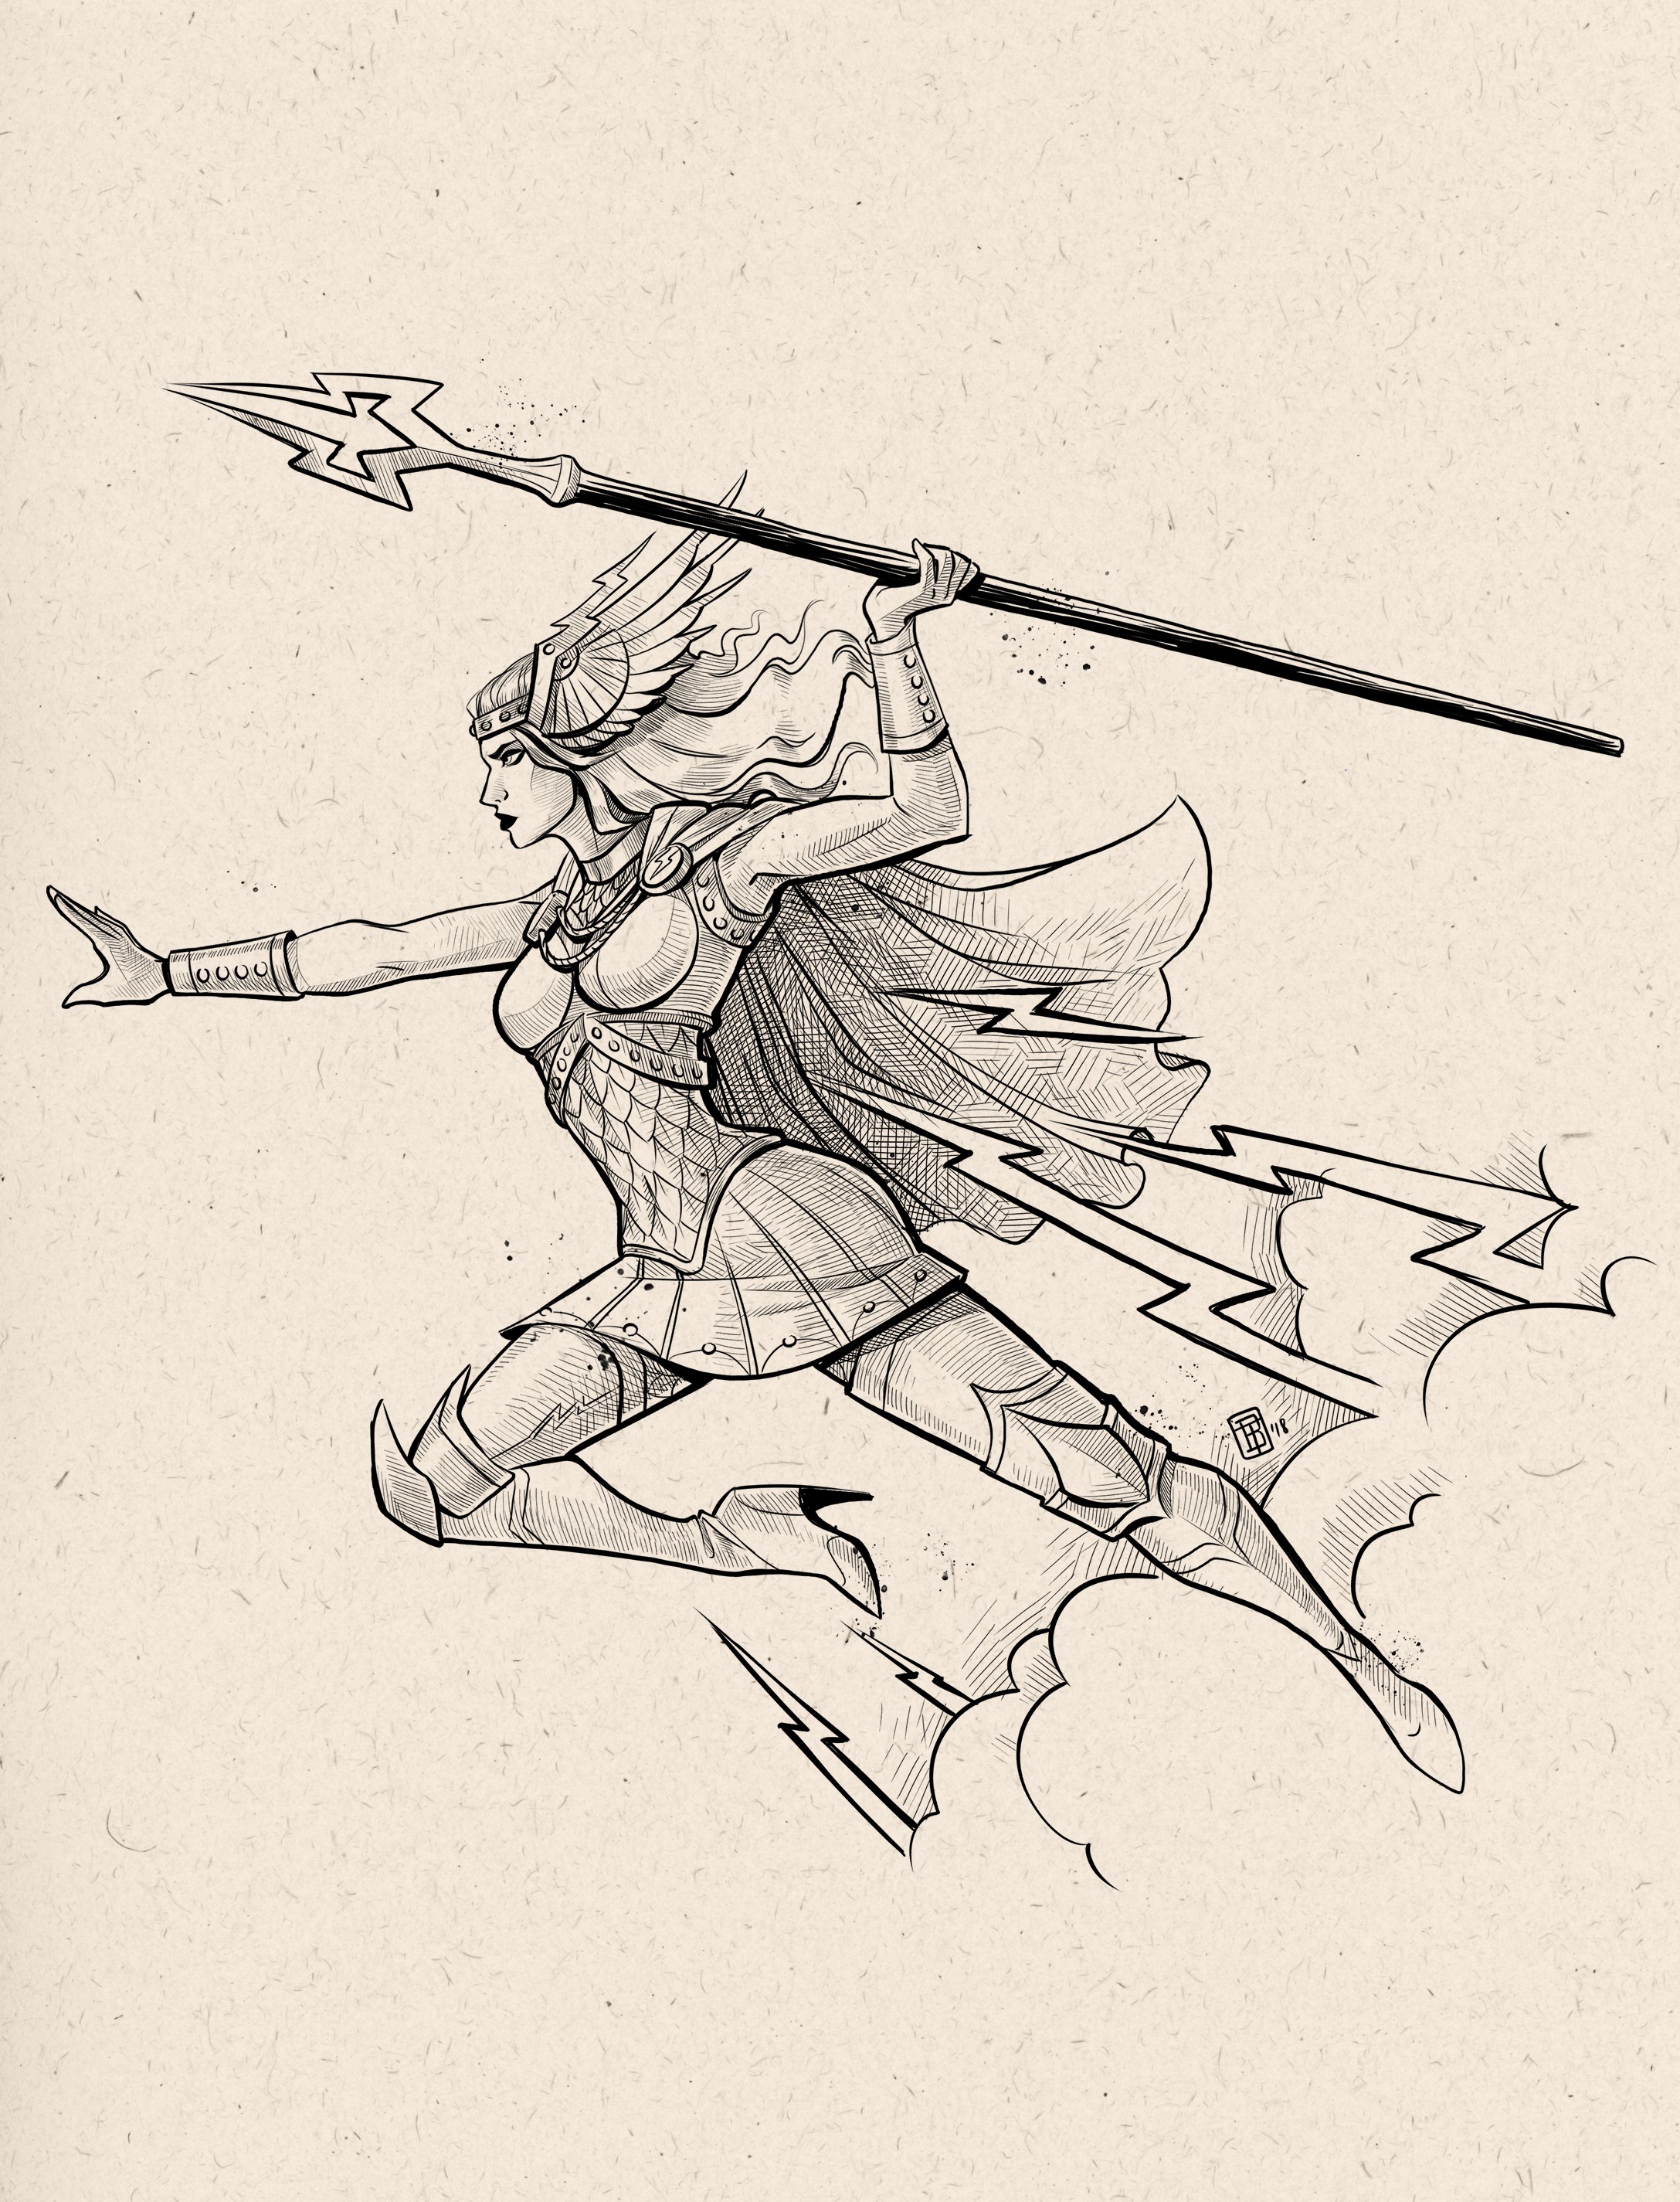 General 2175x2850 Tess Brownson drawing women monochrome pencil drawing paper illustration armor valkyries spear cape helmet boots figure-hugging armor